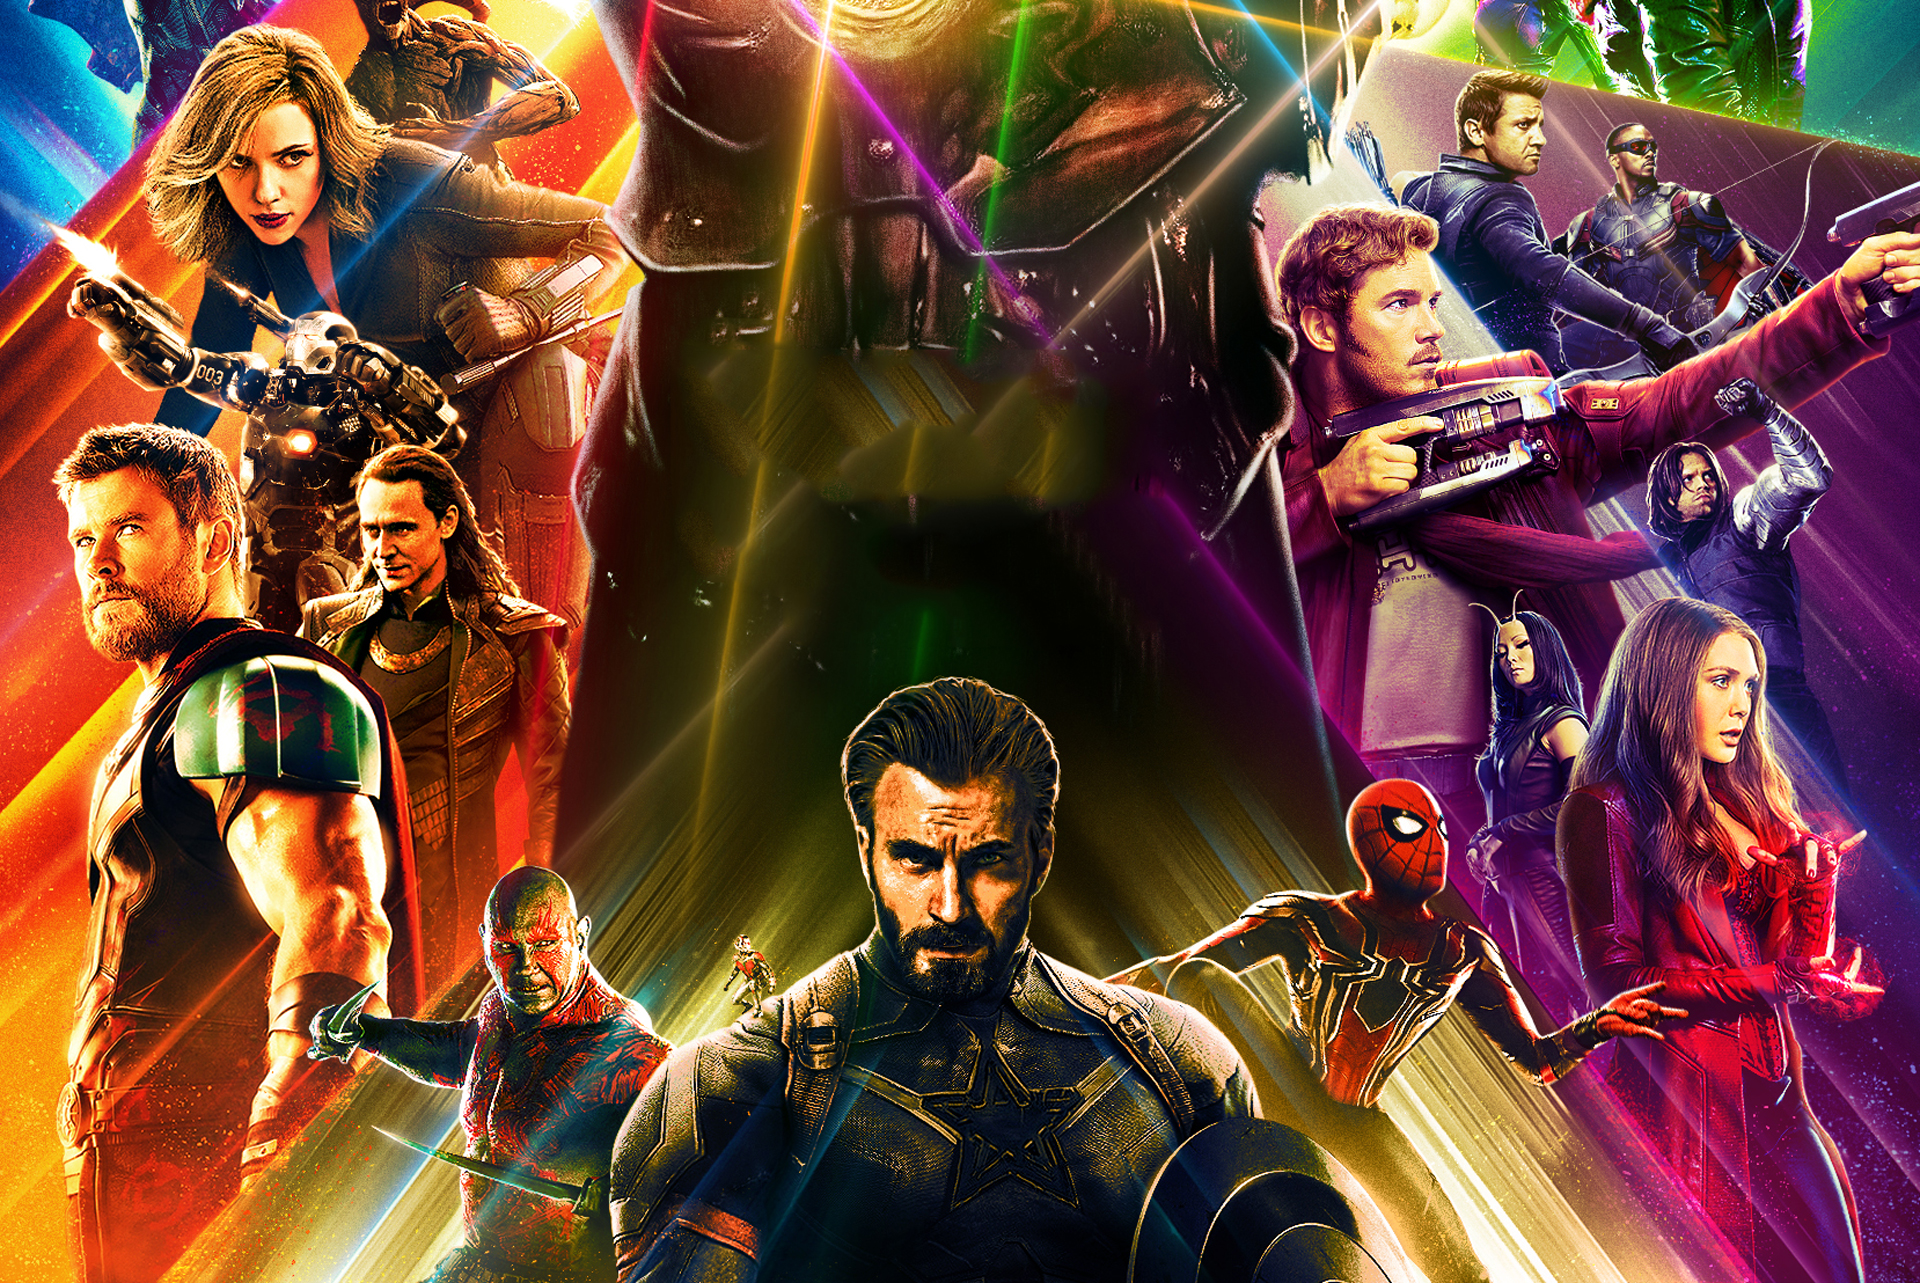 Free download wallpaper Spider Man, Captain America, Movie, Thor, Black Widow, Hawkeye, The Avengers, Scarlet Witch, Loki (Marvel Comics), Falcon (Marvel Comics), War Machine, Star Lord, Winter Soldier, Drax The Destroyer, Ant Man, Mantis (Marvel Comics), Avengers: Infinity War on your PC desktop